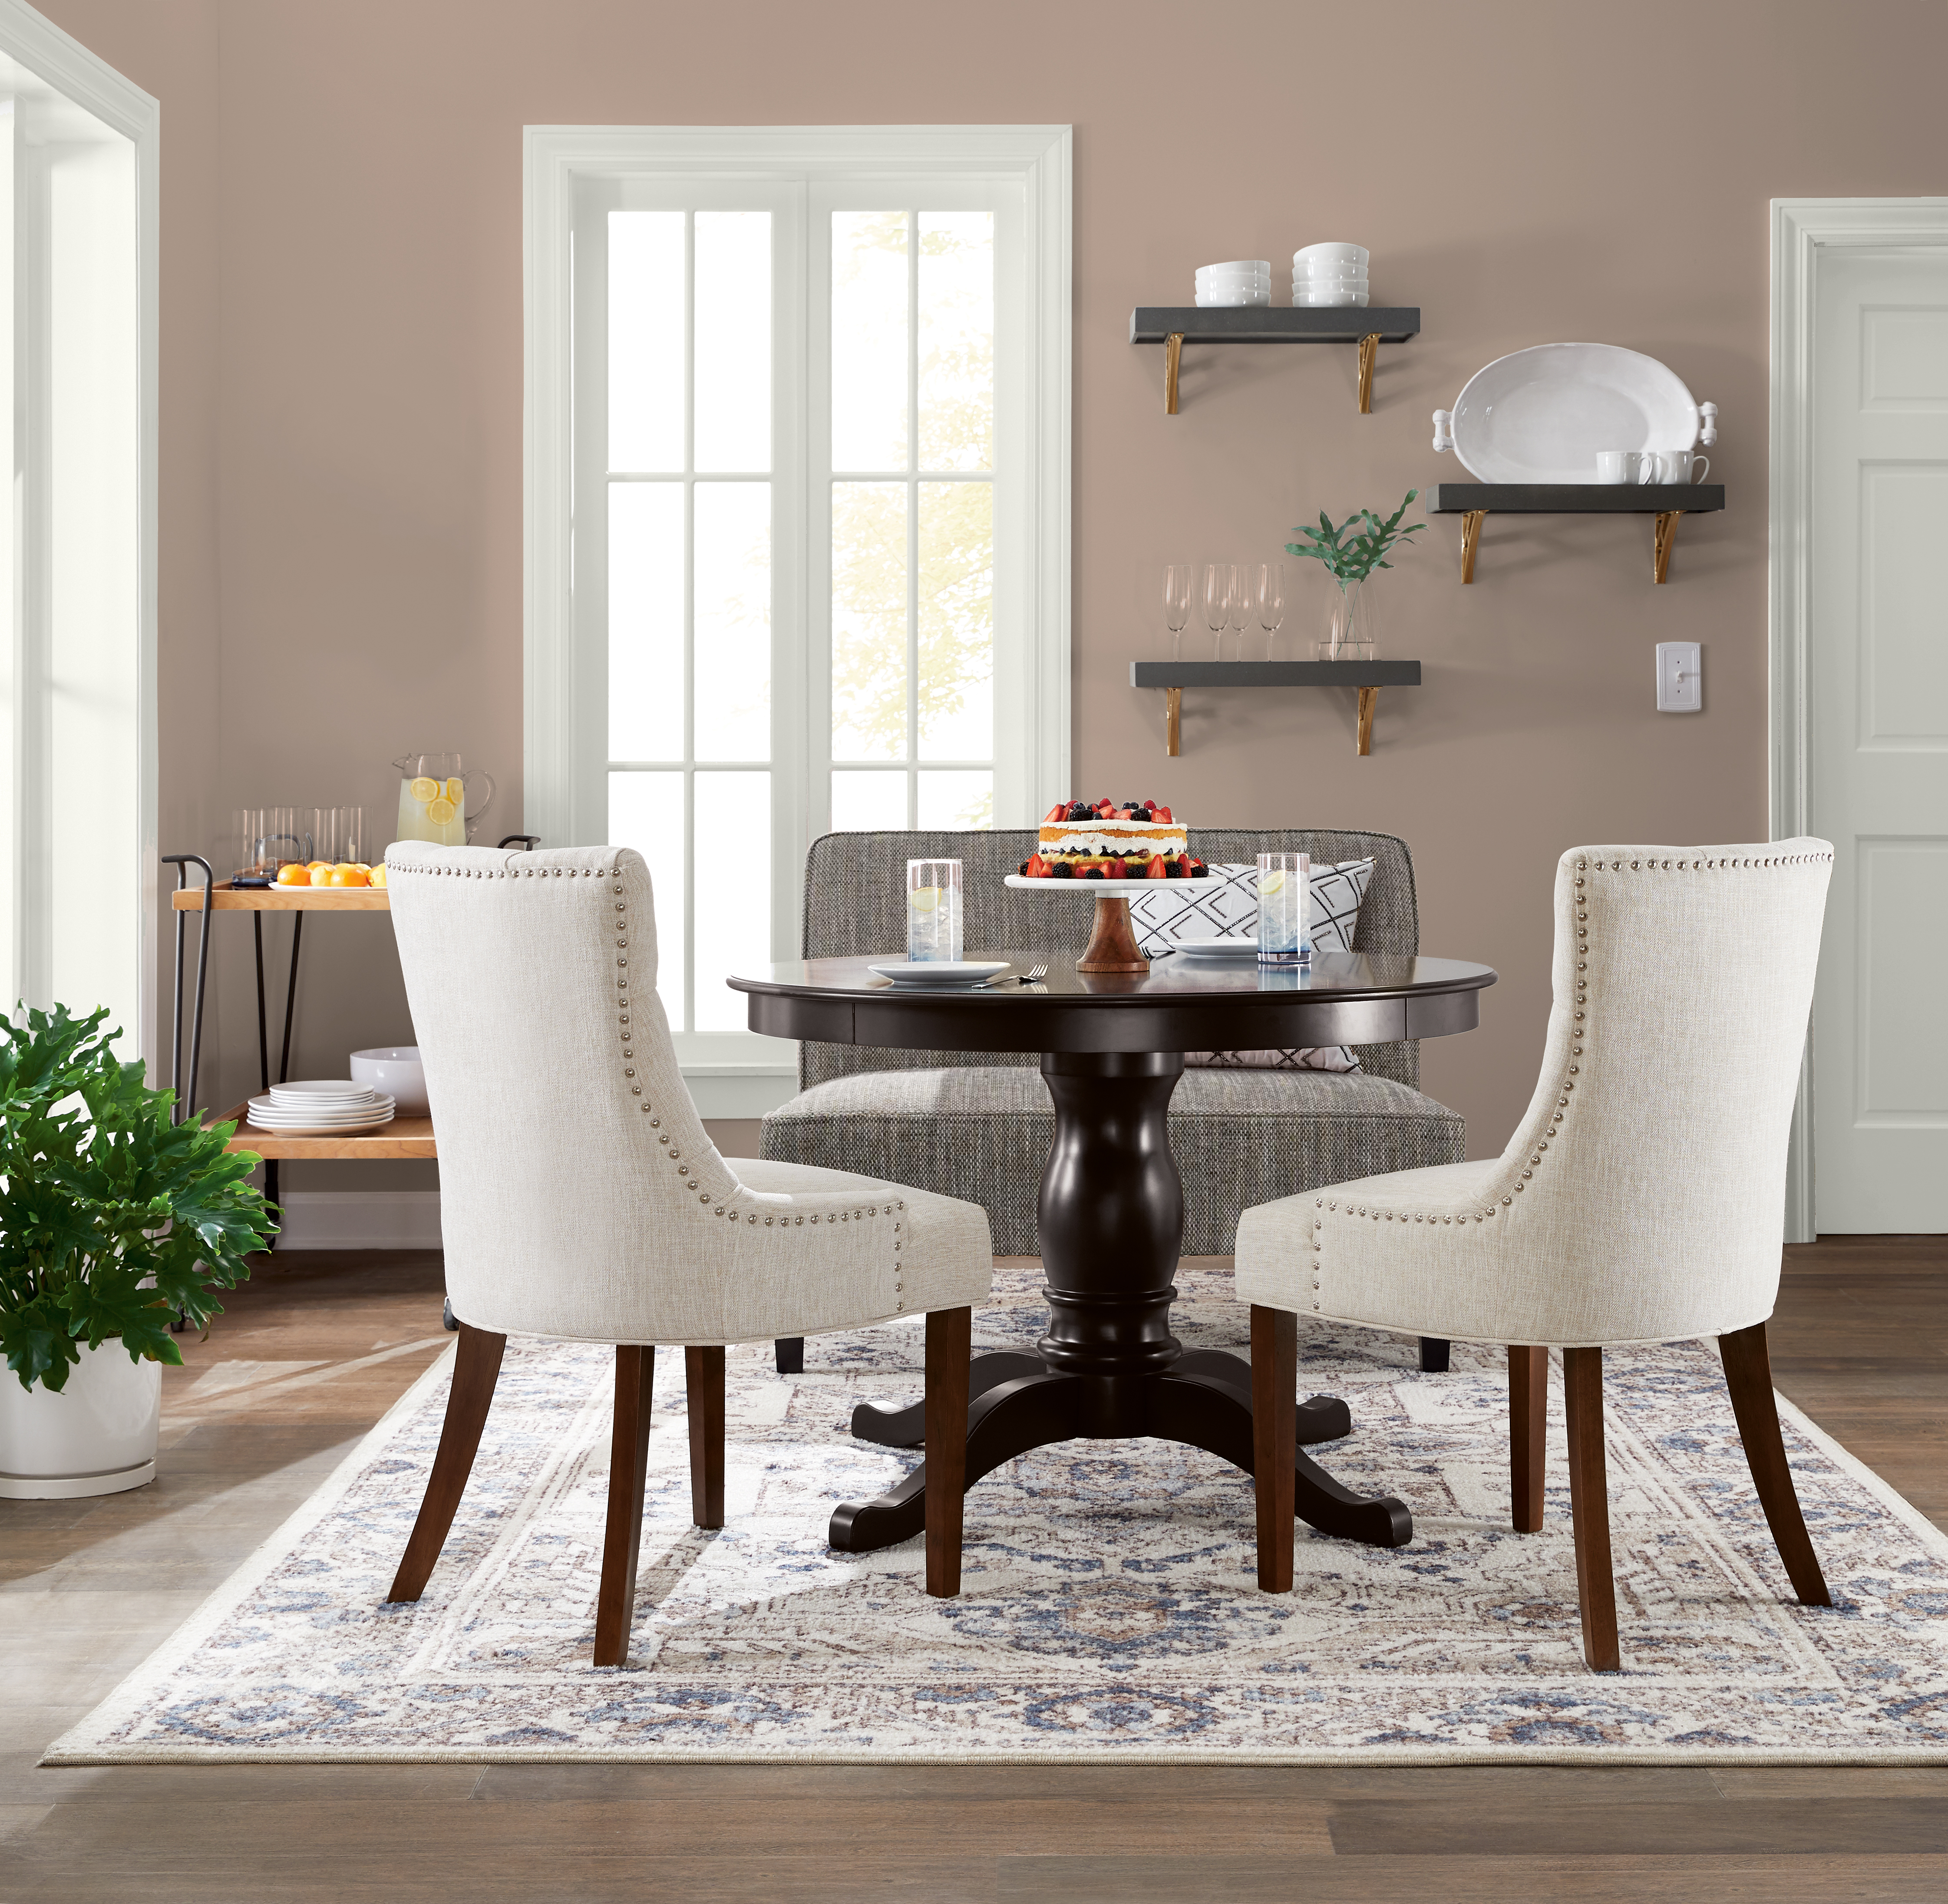 A dining area with taupe walls and white trim around the windows and doors